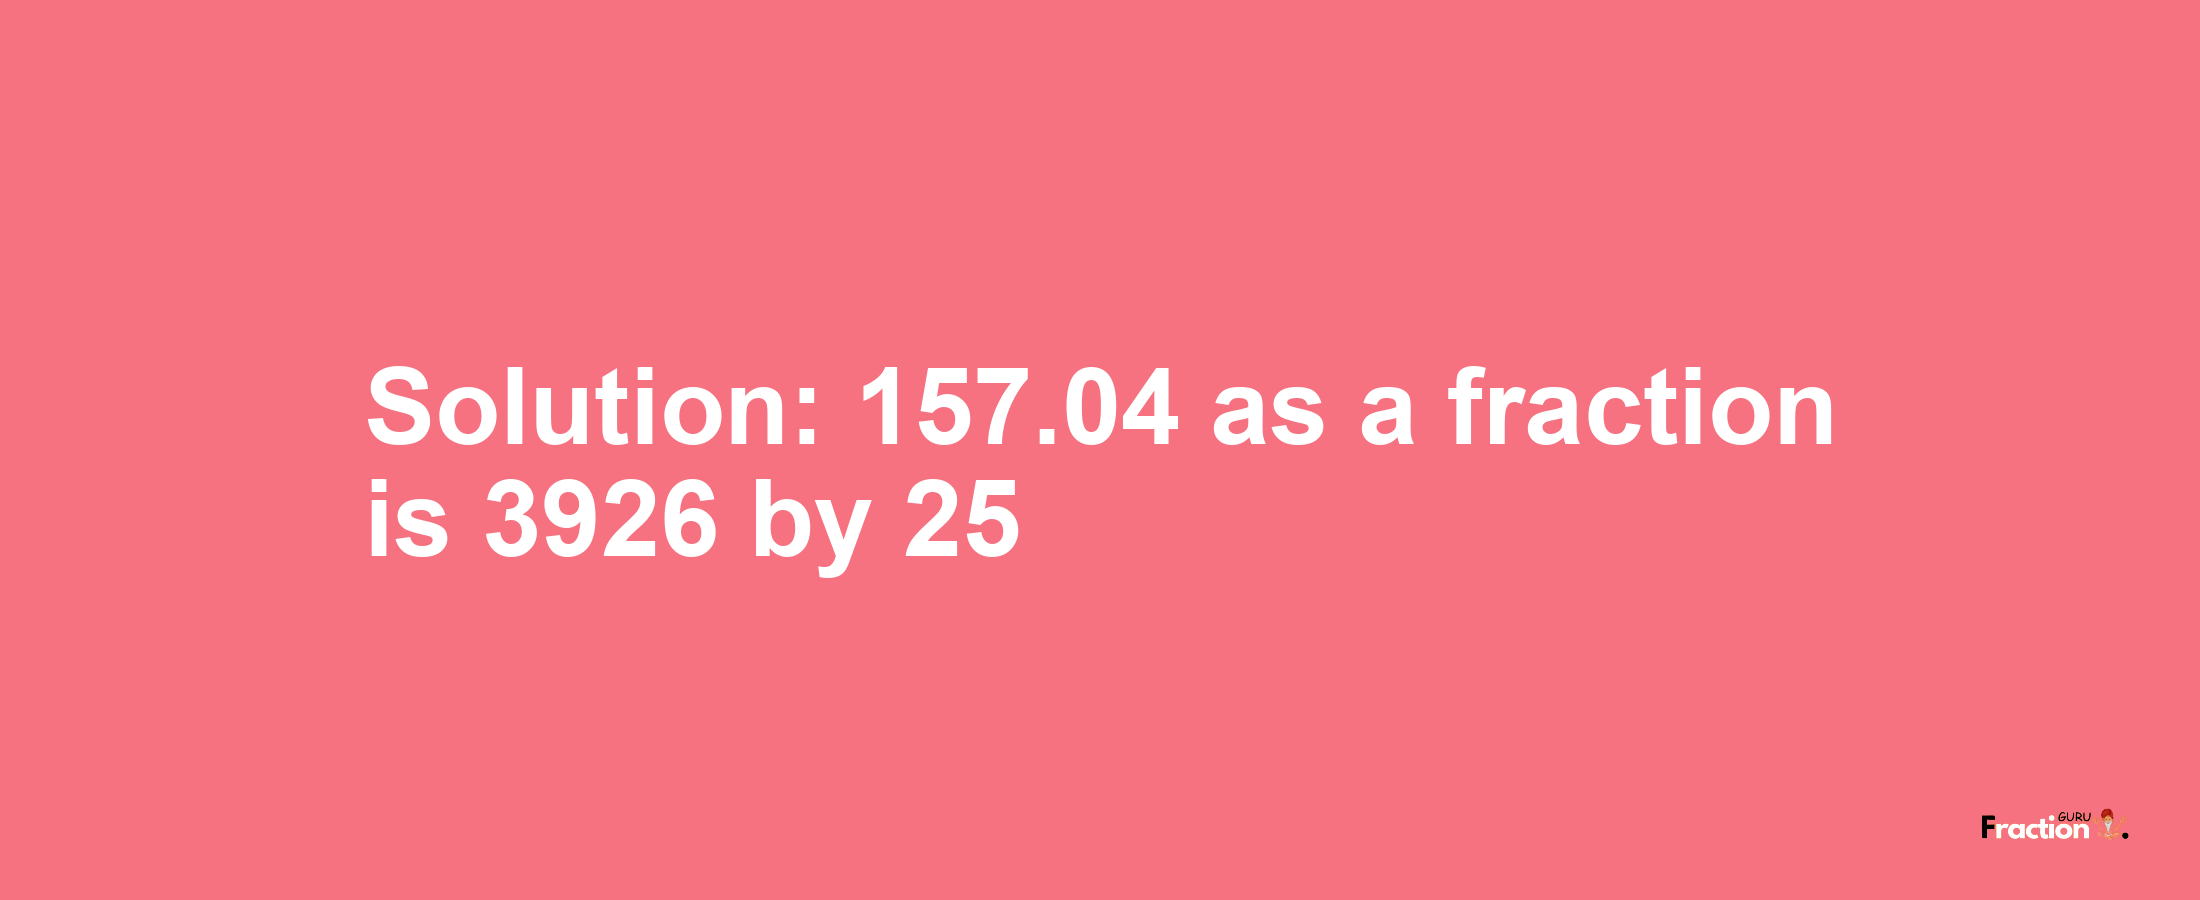 Solution:157.04 as a fraction is 3926/25